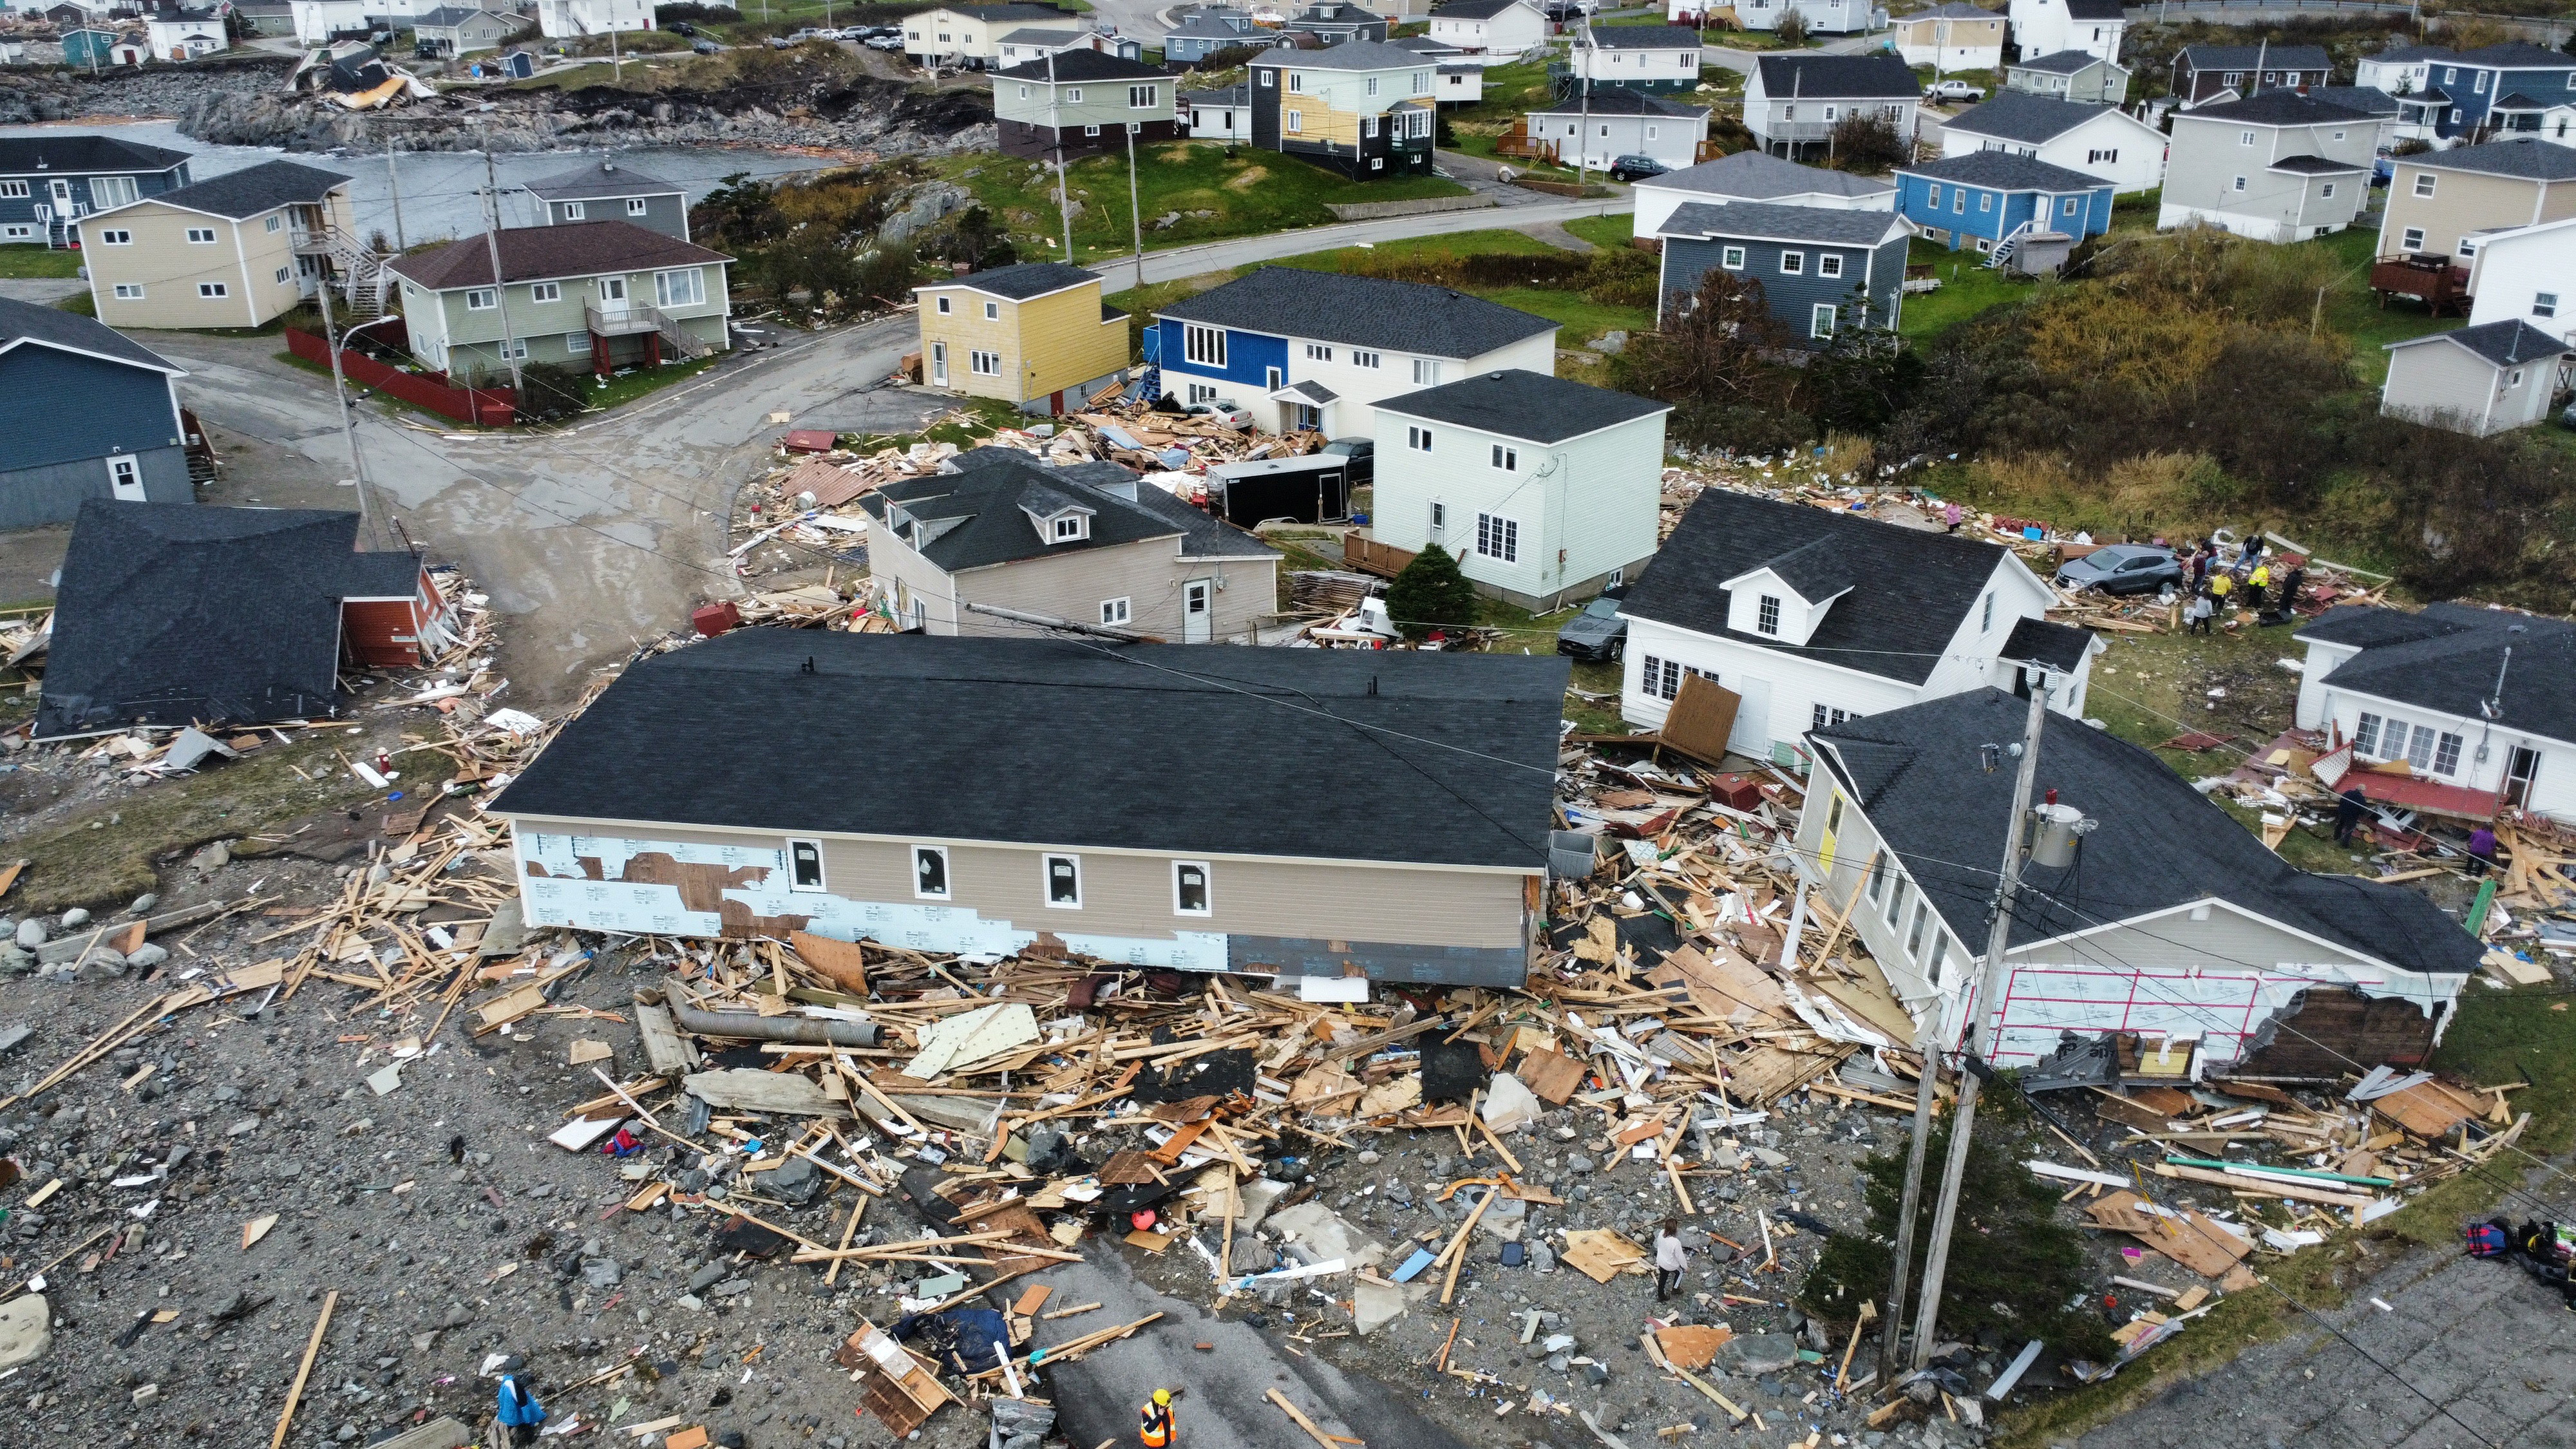 The aftermath of Hurricane Fiona in Newfoundland